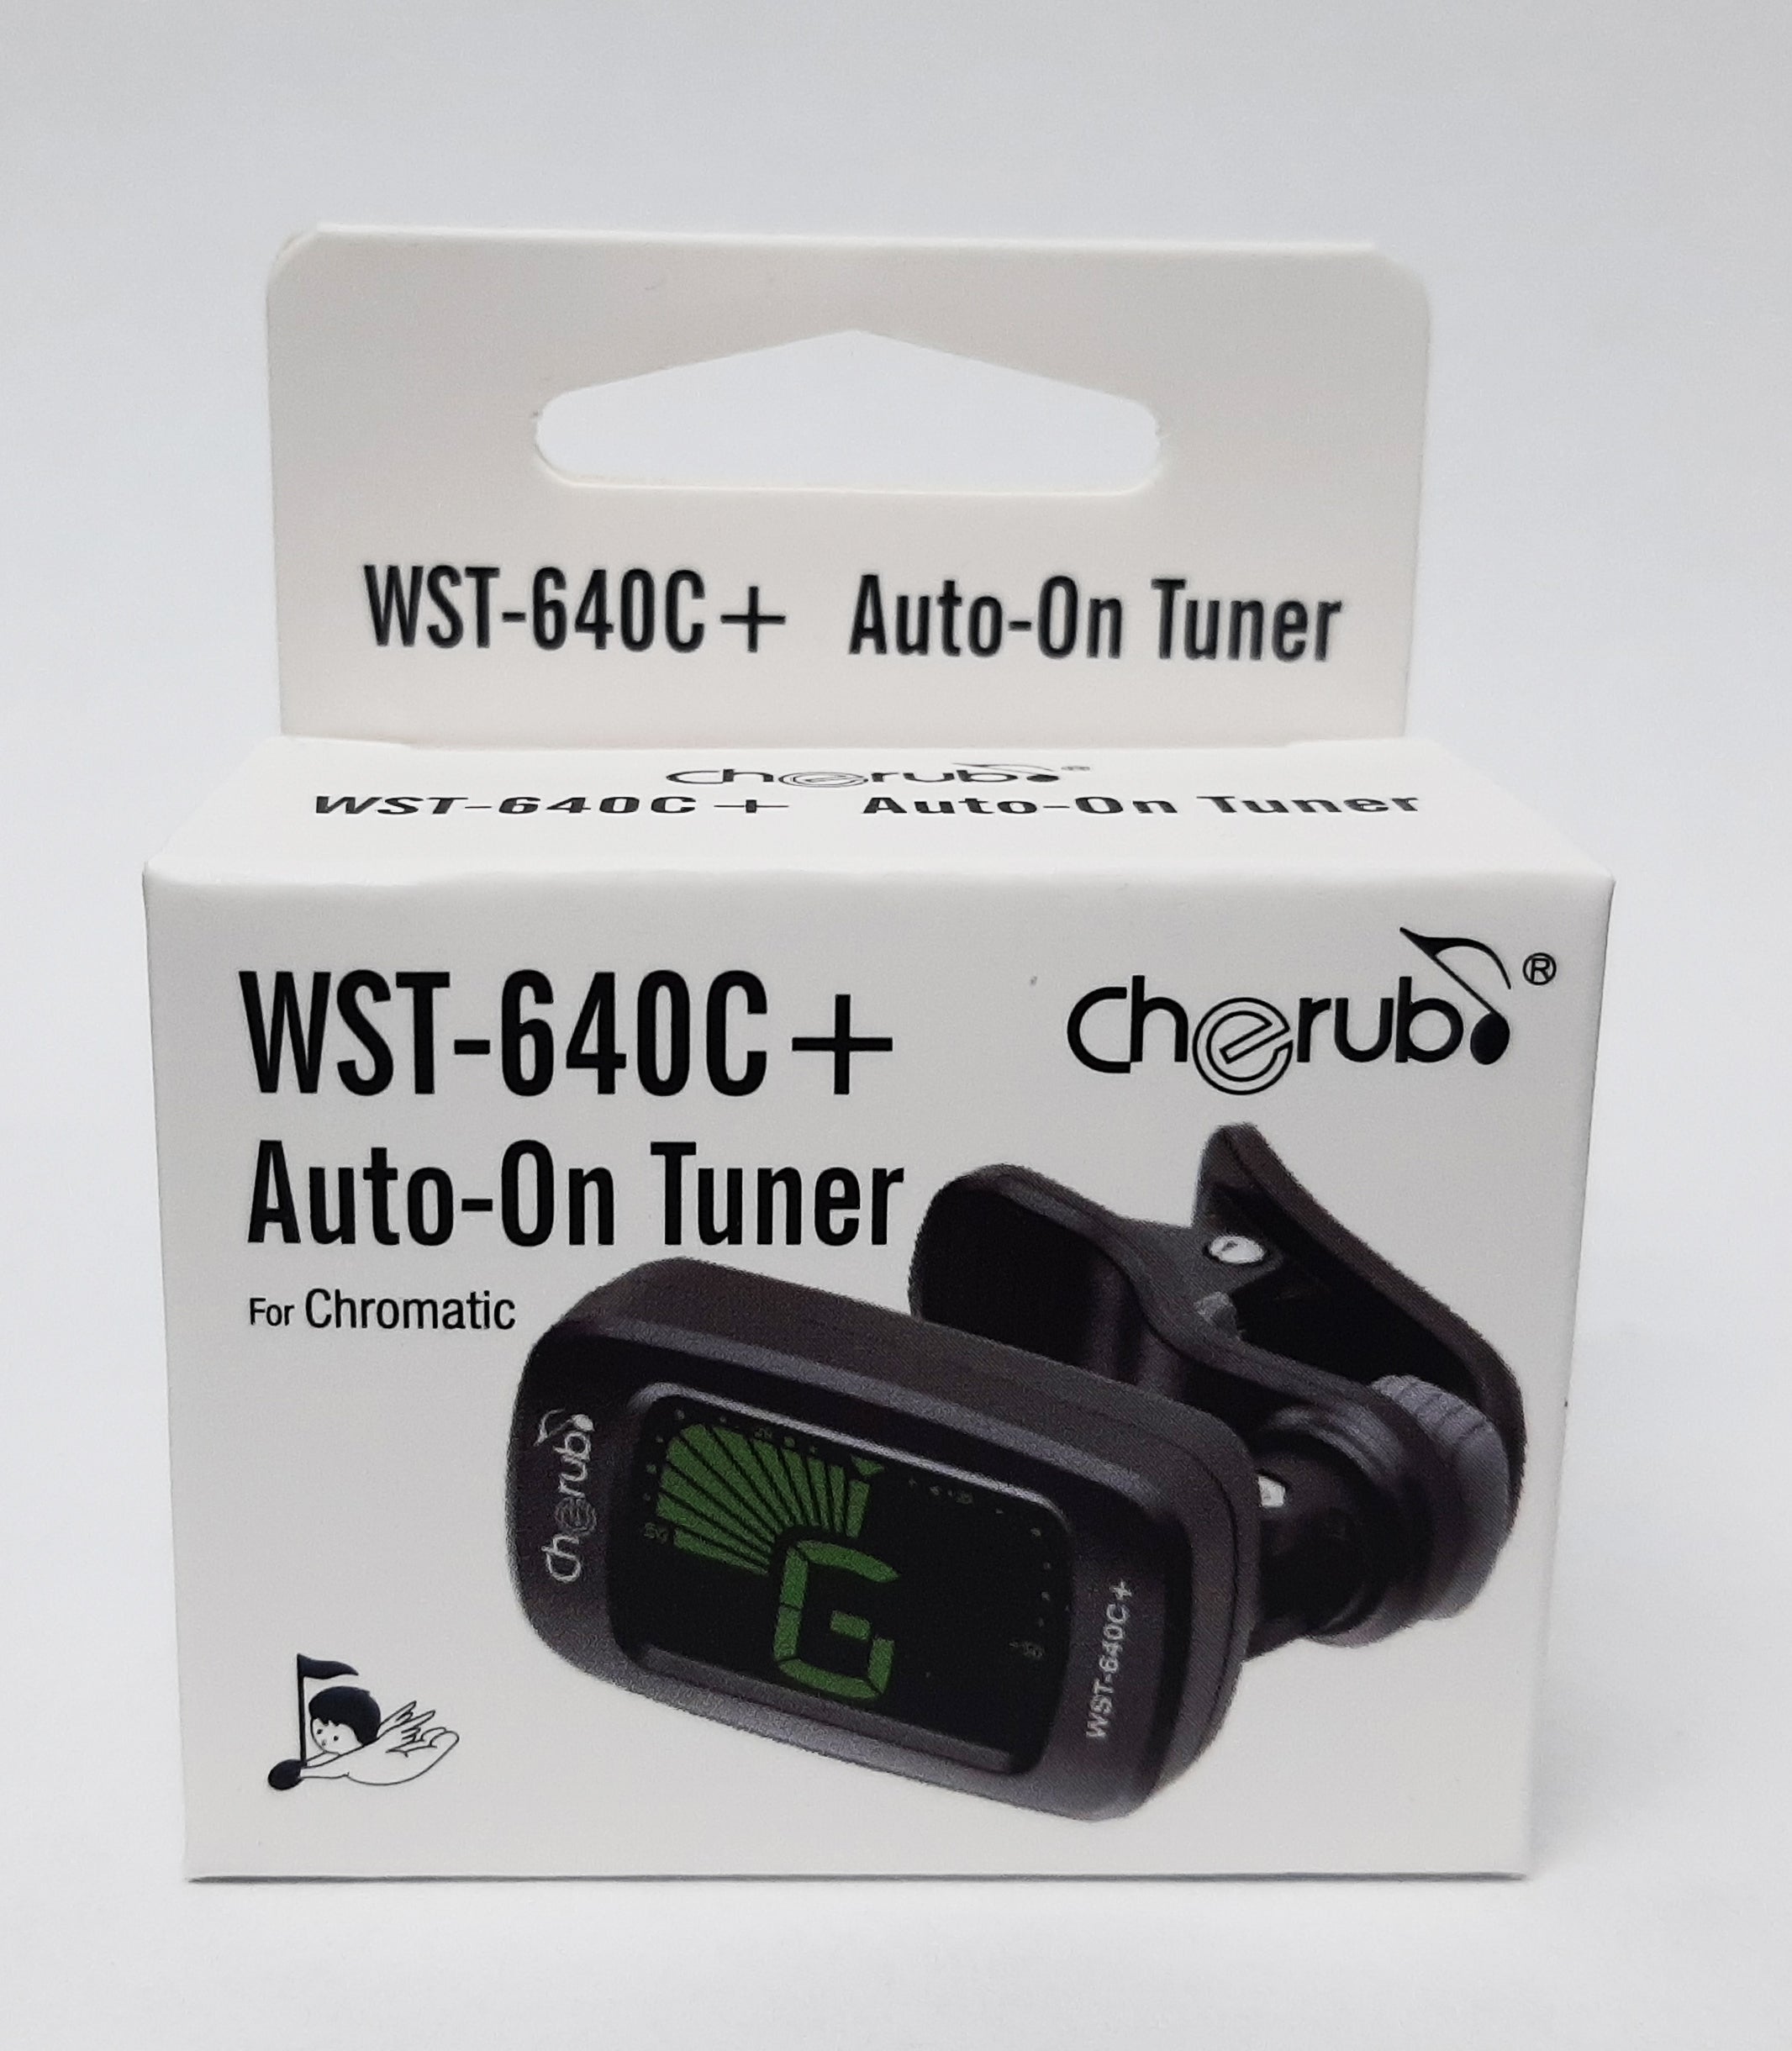 Cherub Clip-On Chromatic Tuner 3 Color Backlit LCD Display